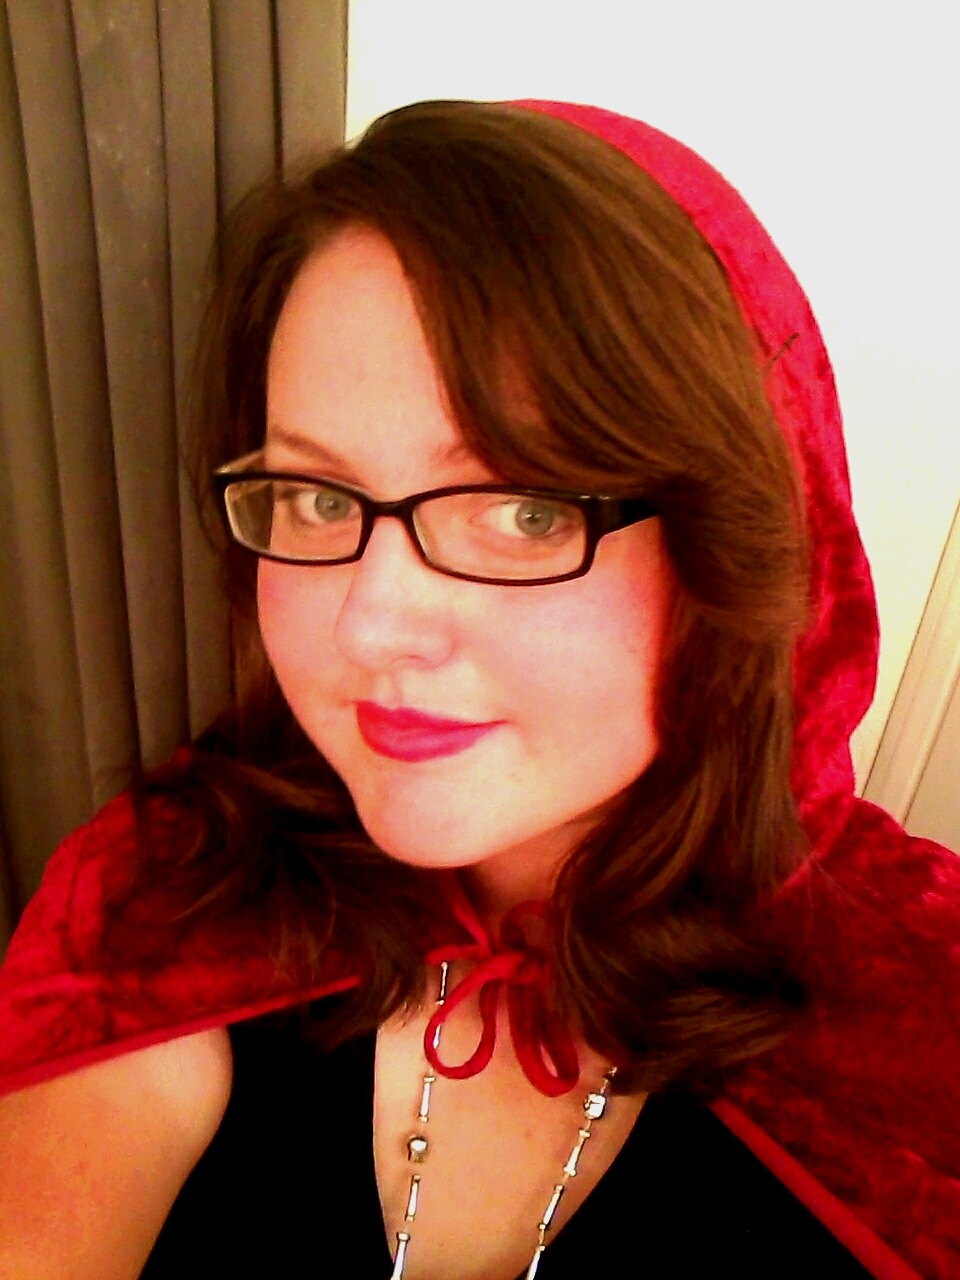 Halloween costume is a go! Of course I had to be little red riding hood~ [CoughJustWantedTheCapeCougH